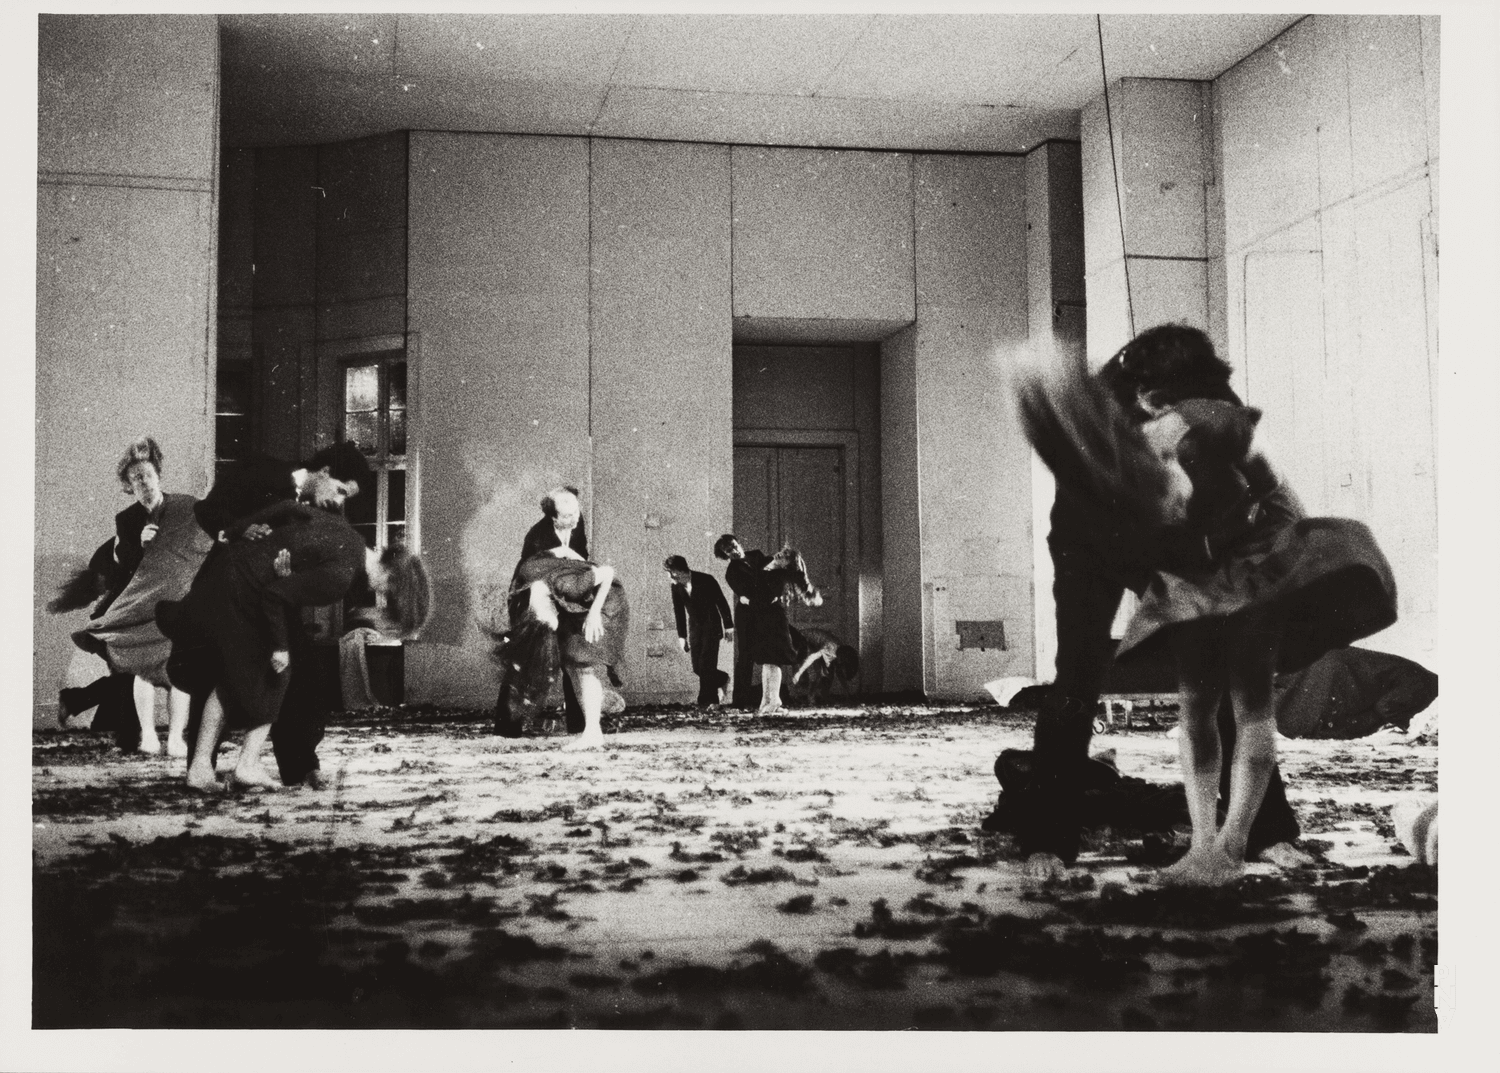 Jacques Patarozzi, Arnaldo Alvarez and John Giffin in “Bluebeard. While Listening to a Tape Recording of Béla Bartók's Opera "Duke Bluebeard's Castle"” by Pina Bausch